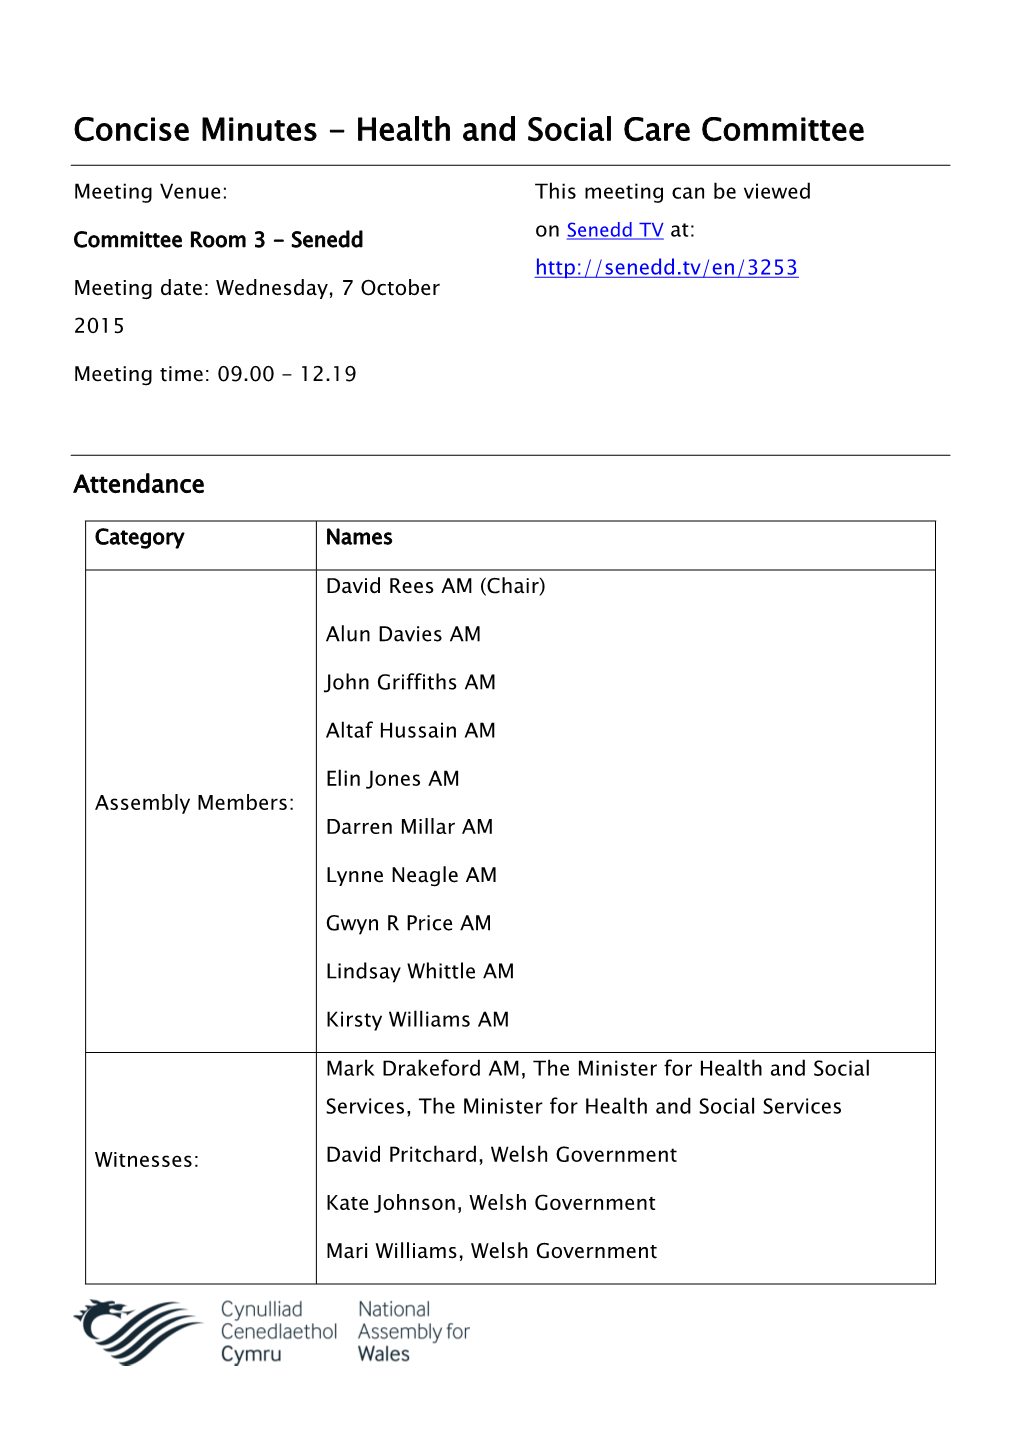 Concise Minutes - Health and Social Care Committee